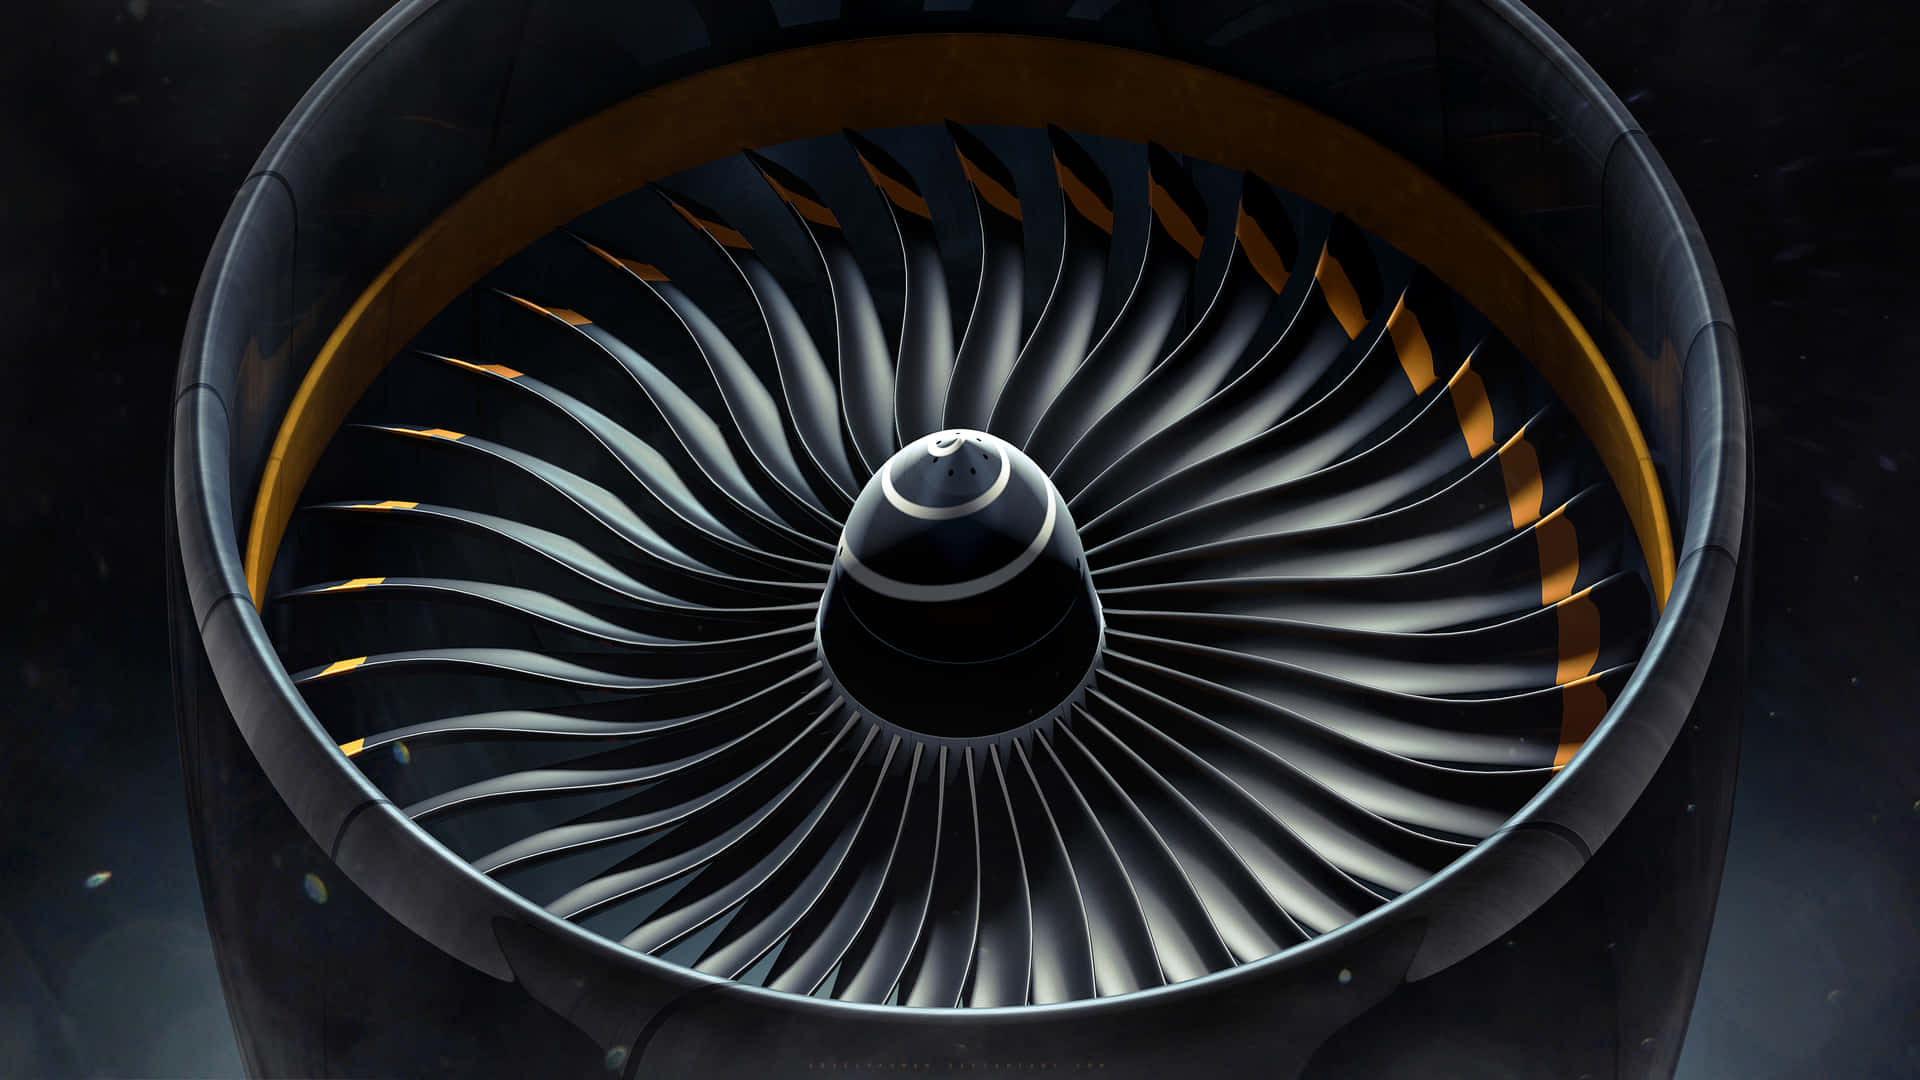 Powerful Jet Engine in Action Wallpaper